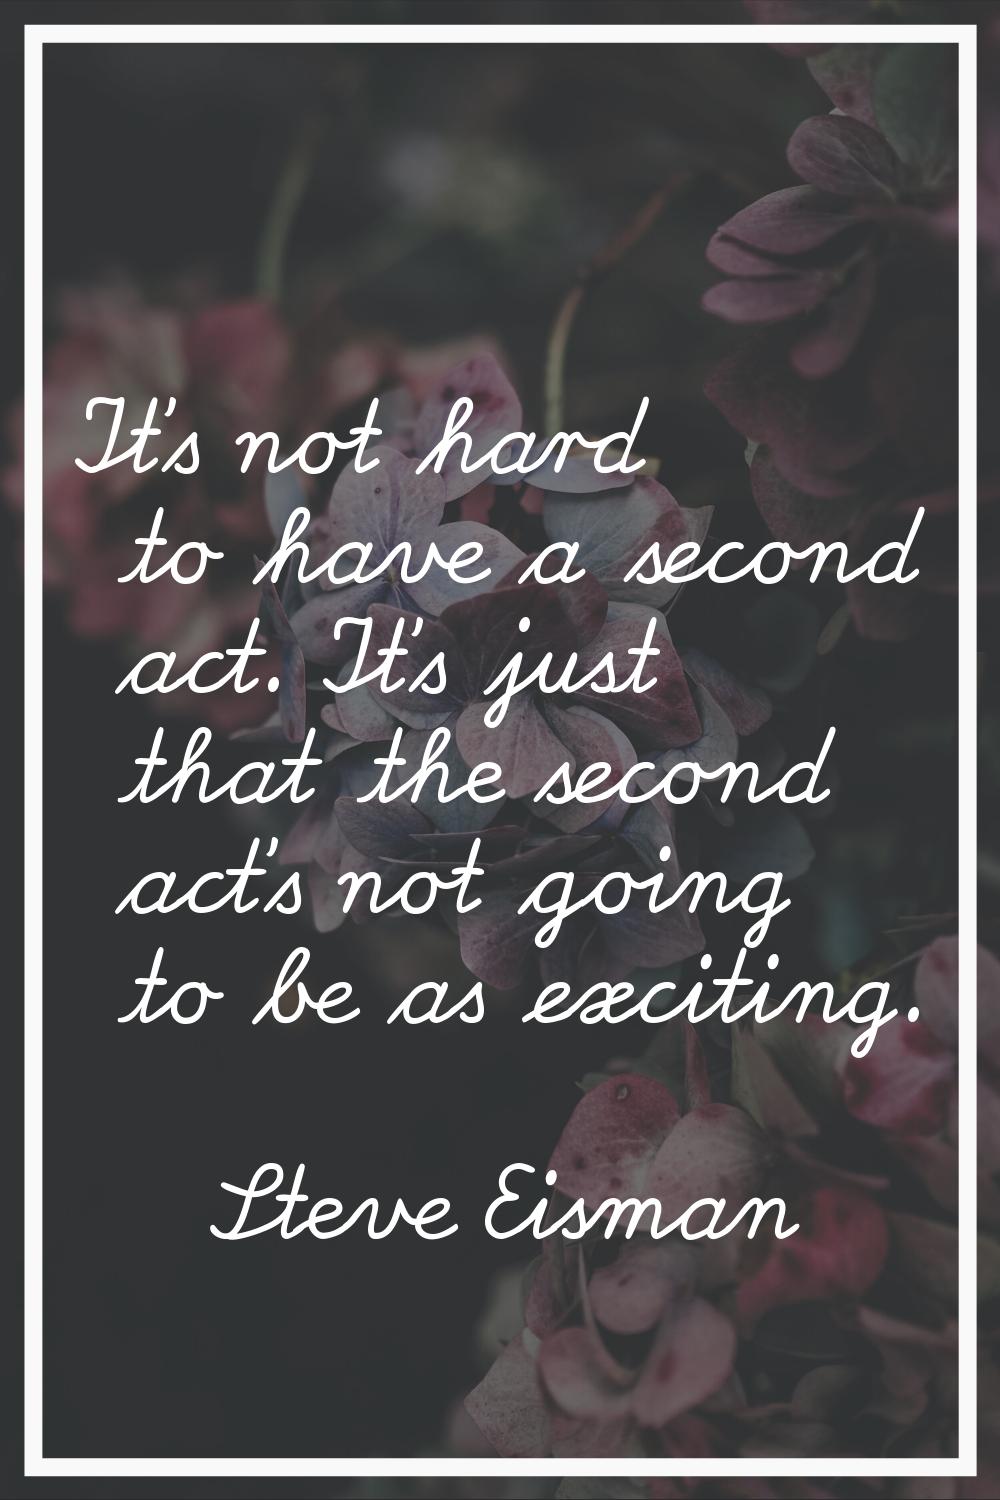 It's not hard to have a second act. It's just that the second act's not going to be as exciting.